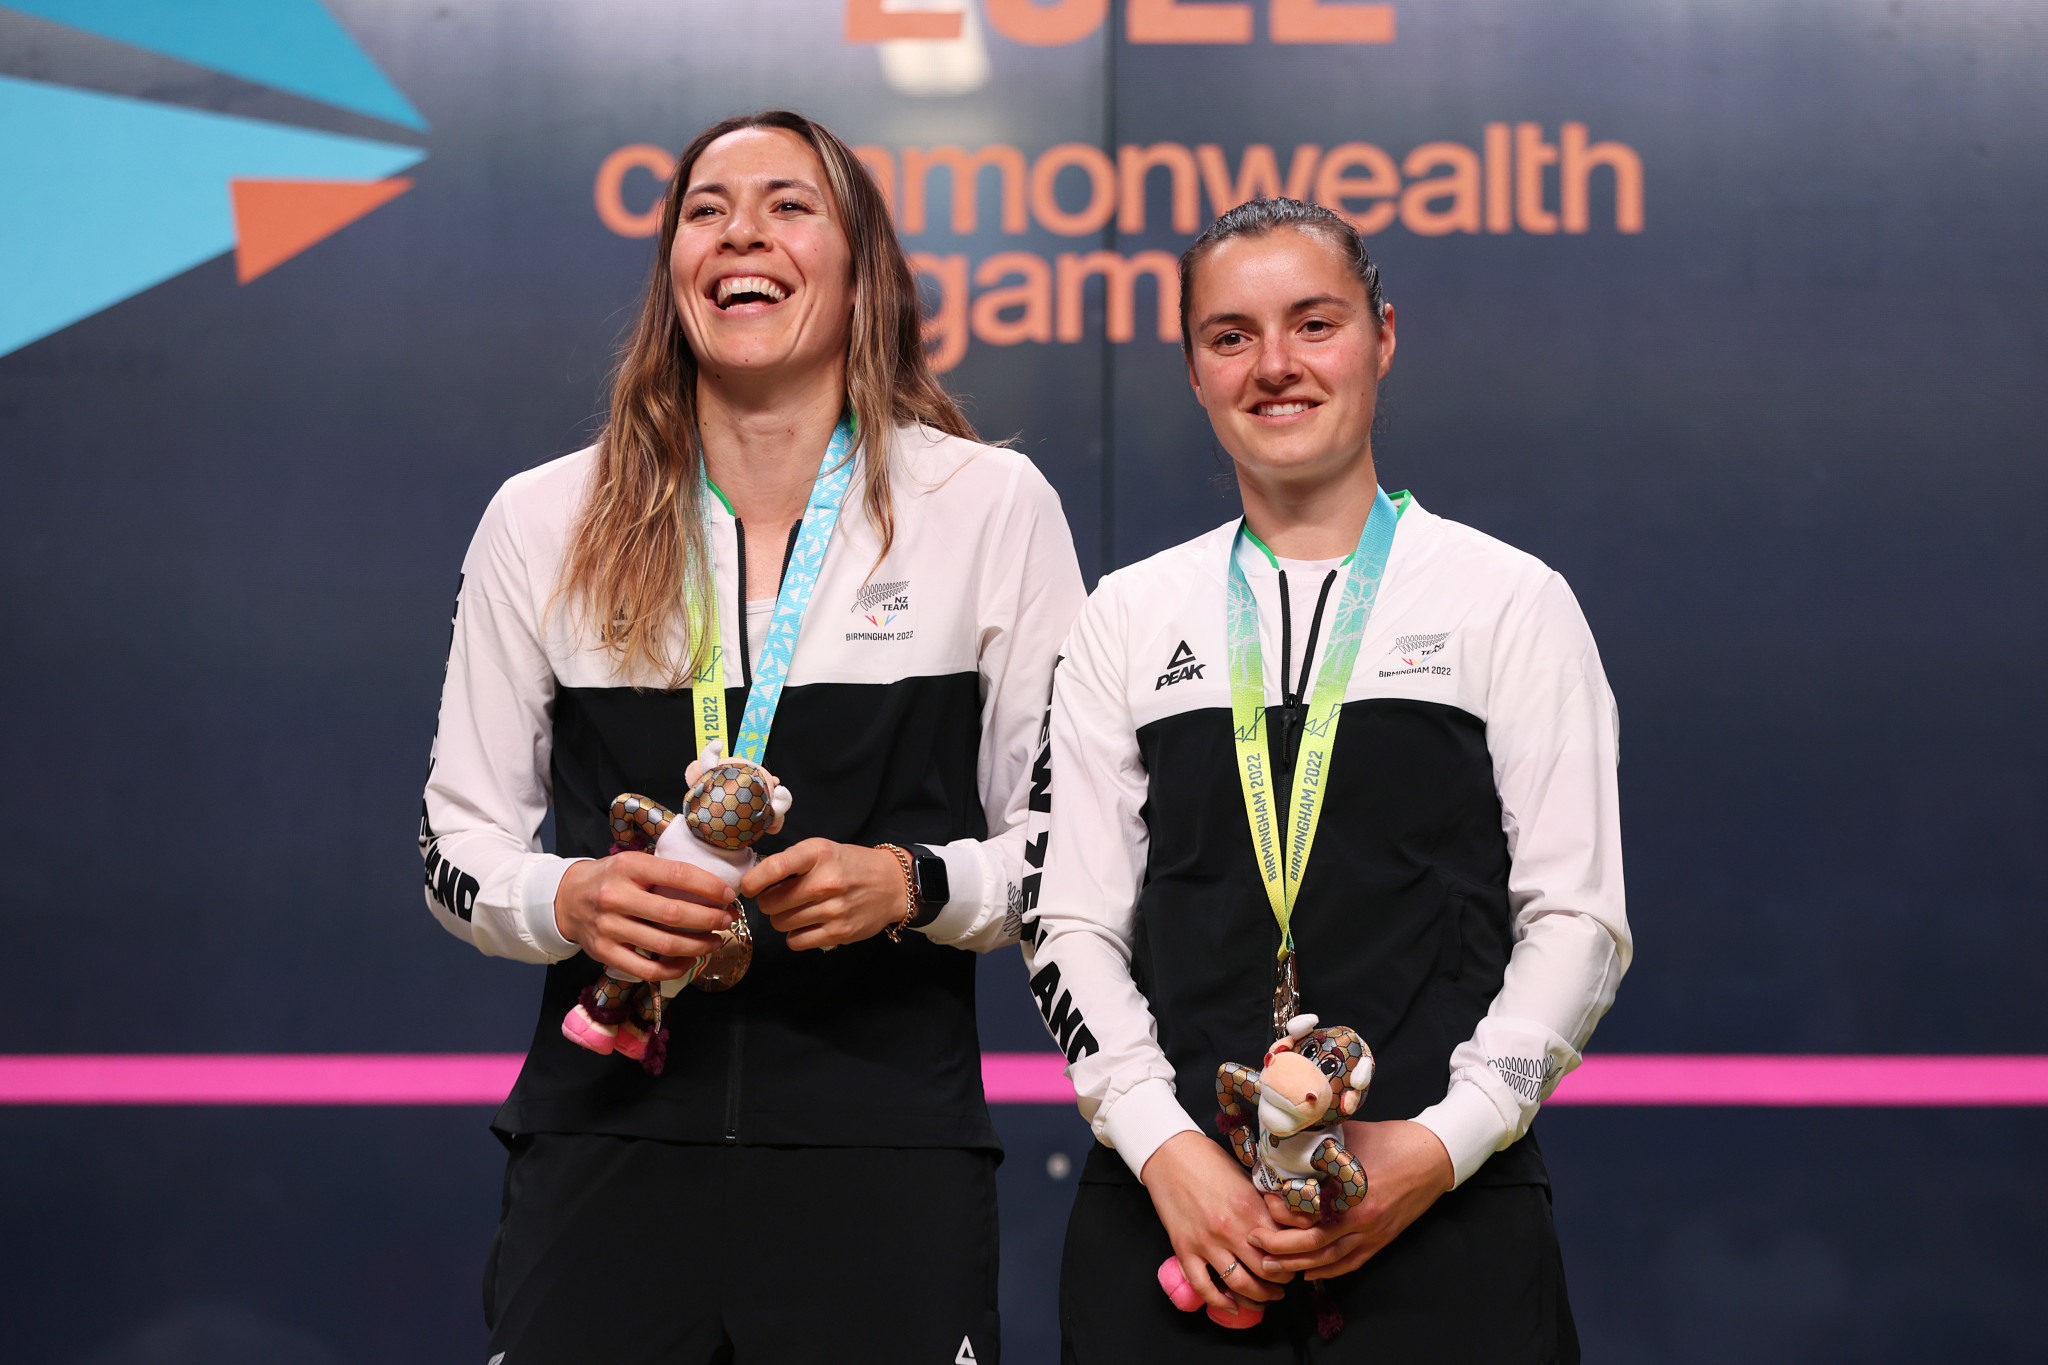 Joelle King, left, and Amanda Landers-Murphy won the Commonwealth Games women's doubles squash title for the second time in a row ©Getty Images